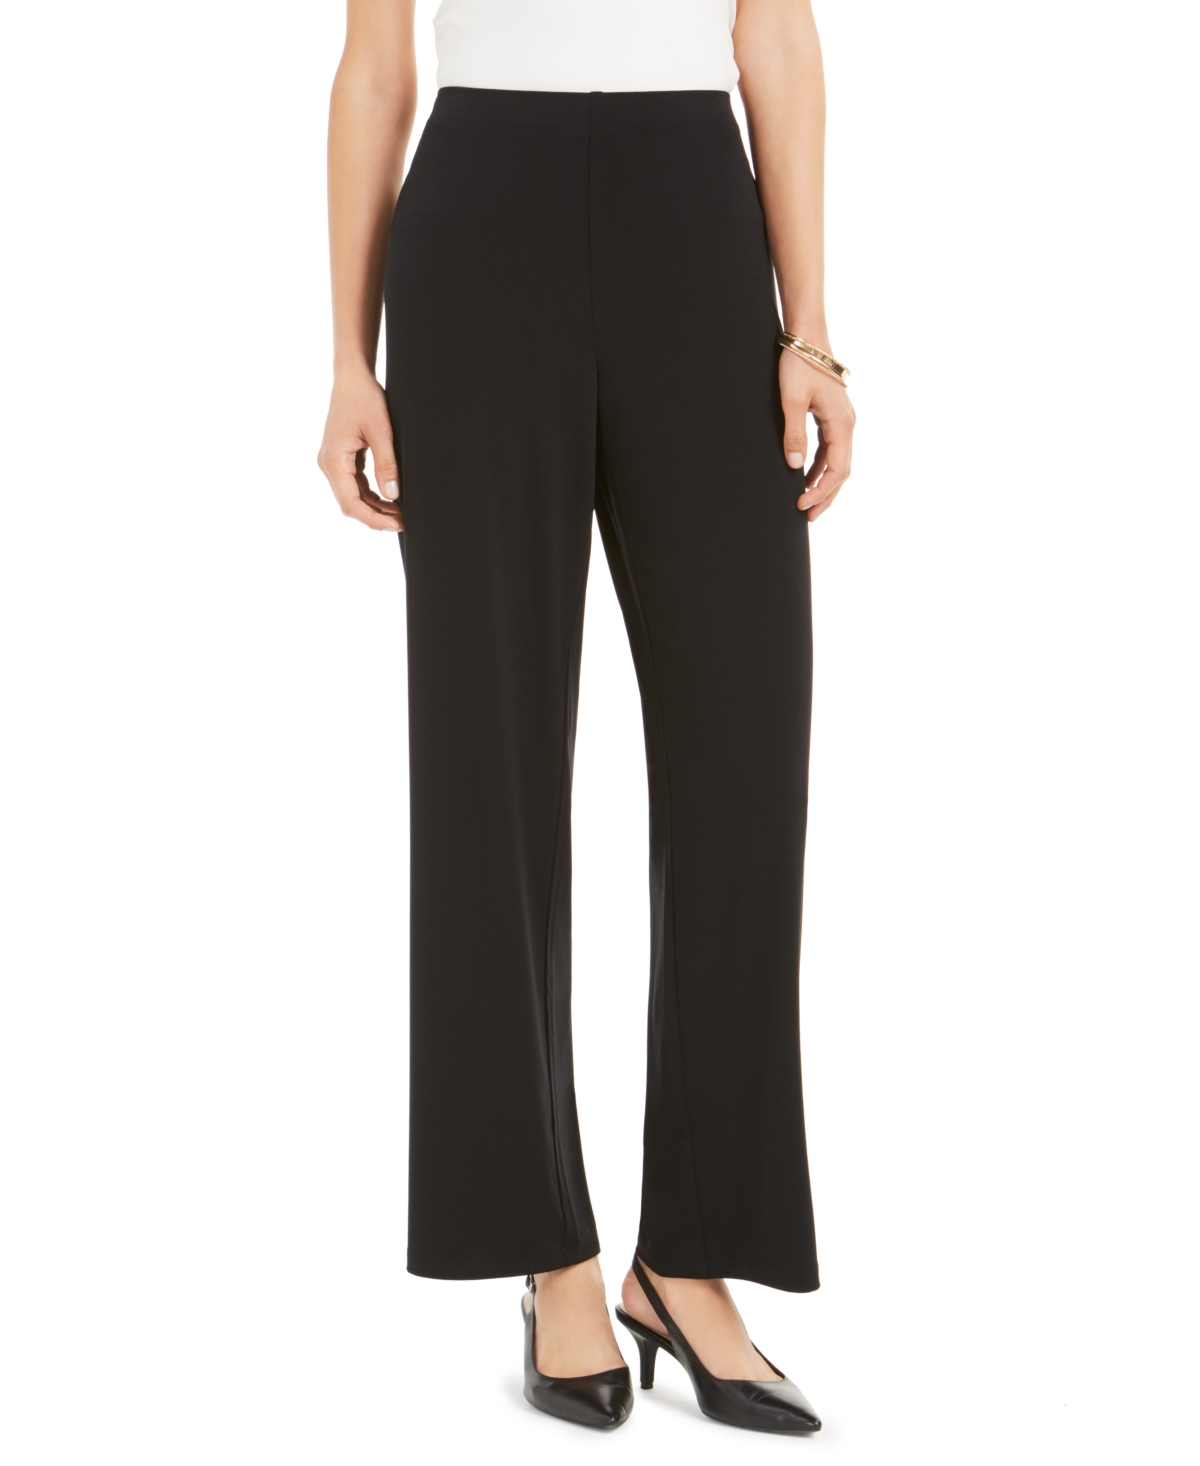 Women's Wide-Leg Pull-On Knit Pants, Created for Macy's - Deep Black